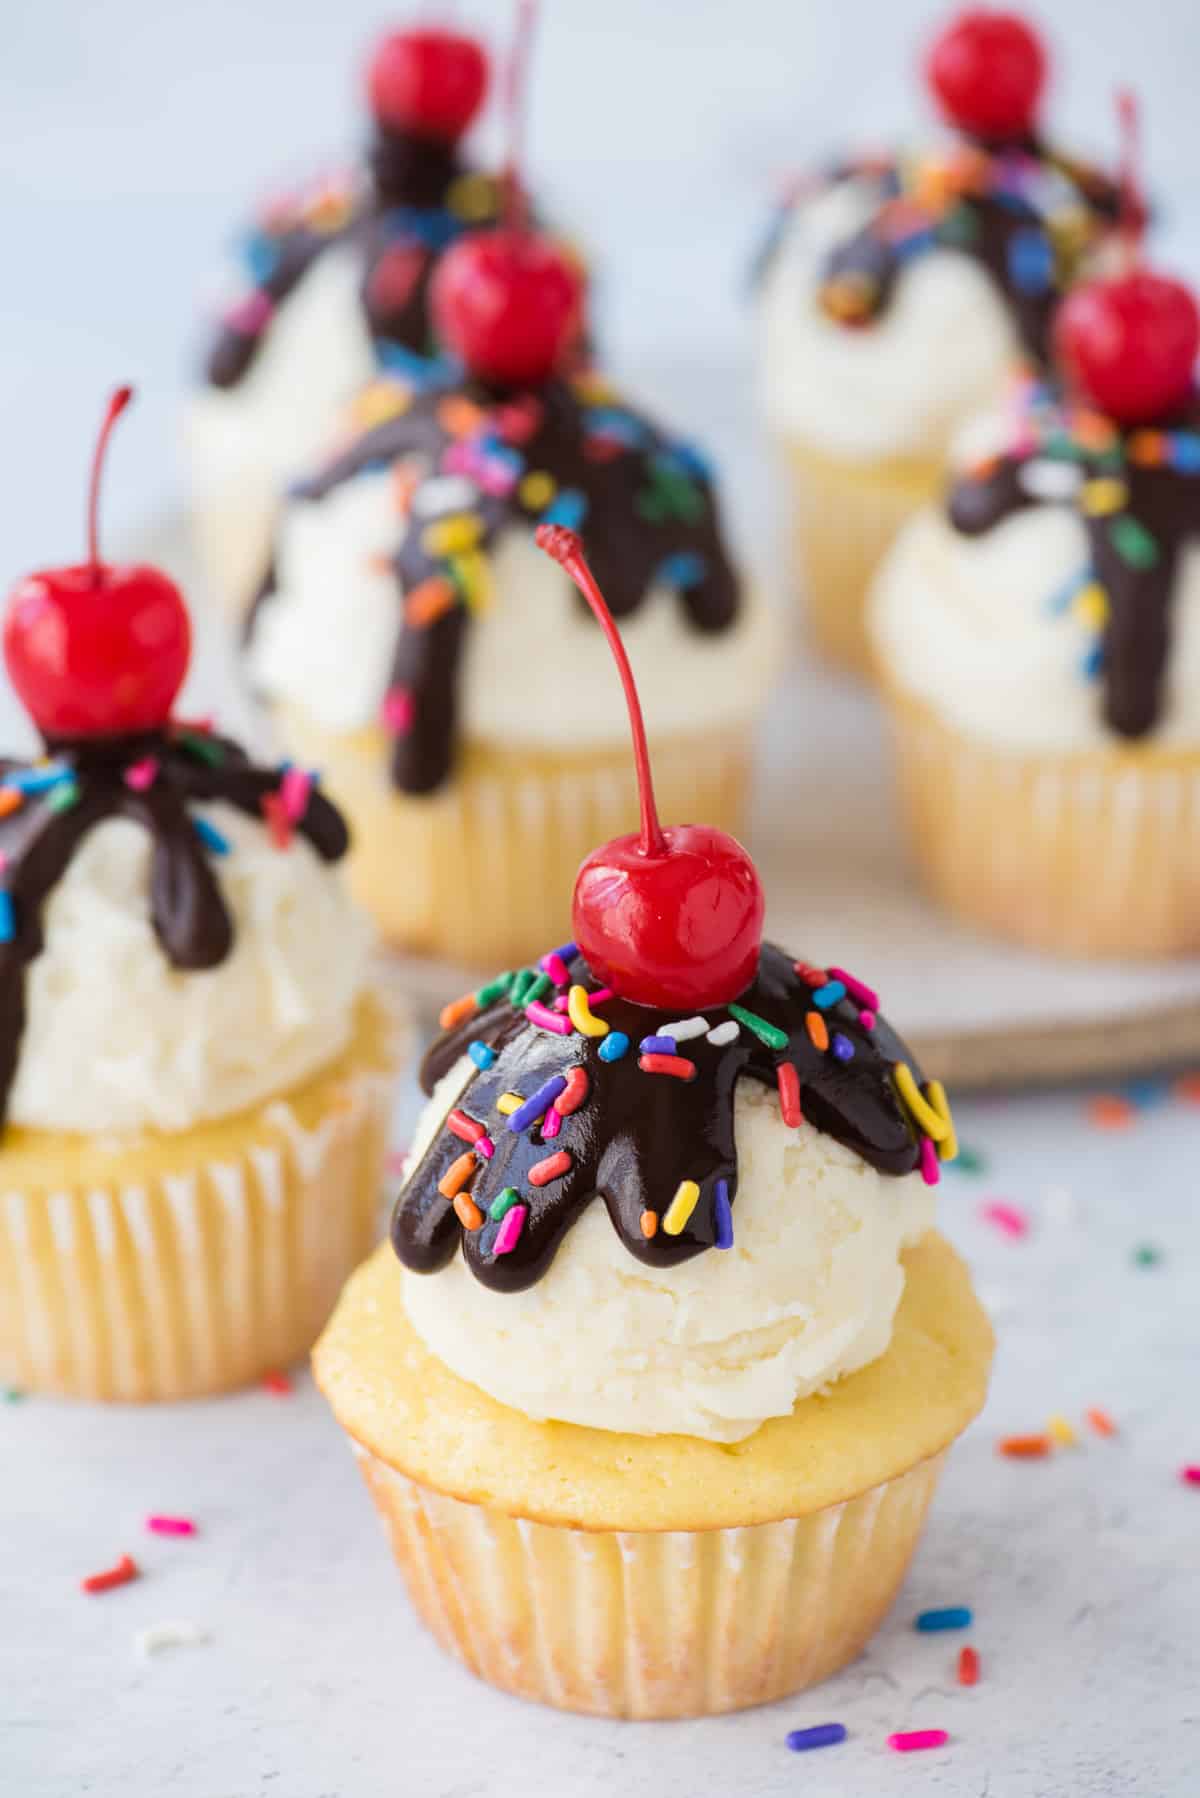 birthday cupcake with scoop of vanilla frosting, chocolate ganache drizzle, sprinkles and maraschino cherry on white background